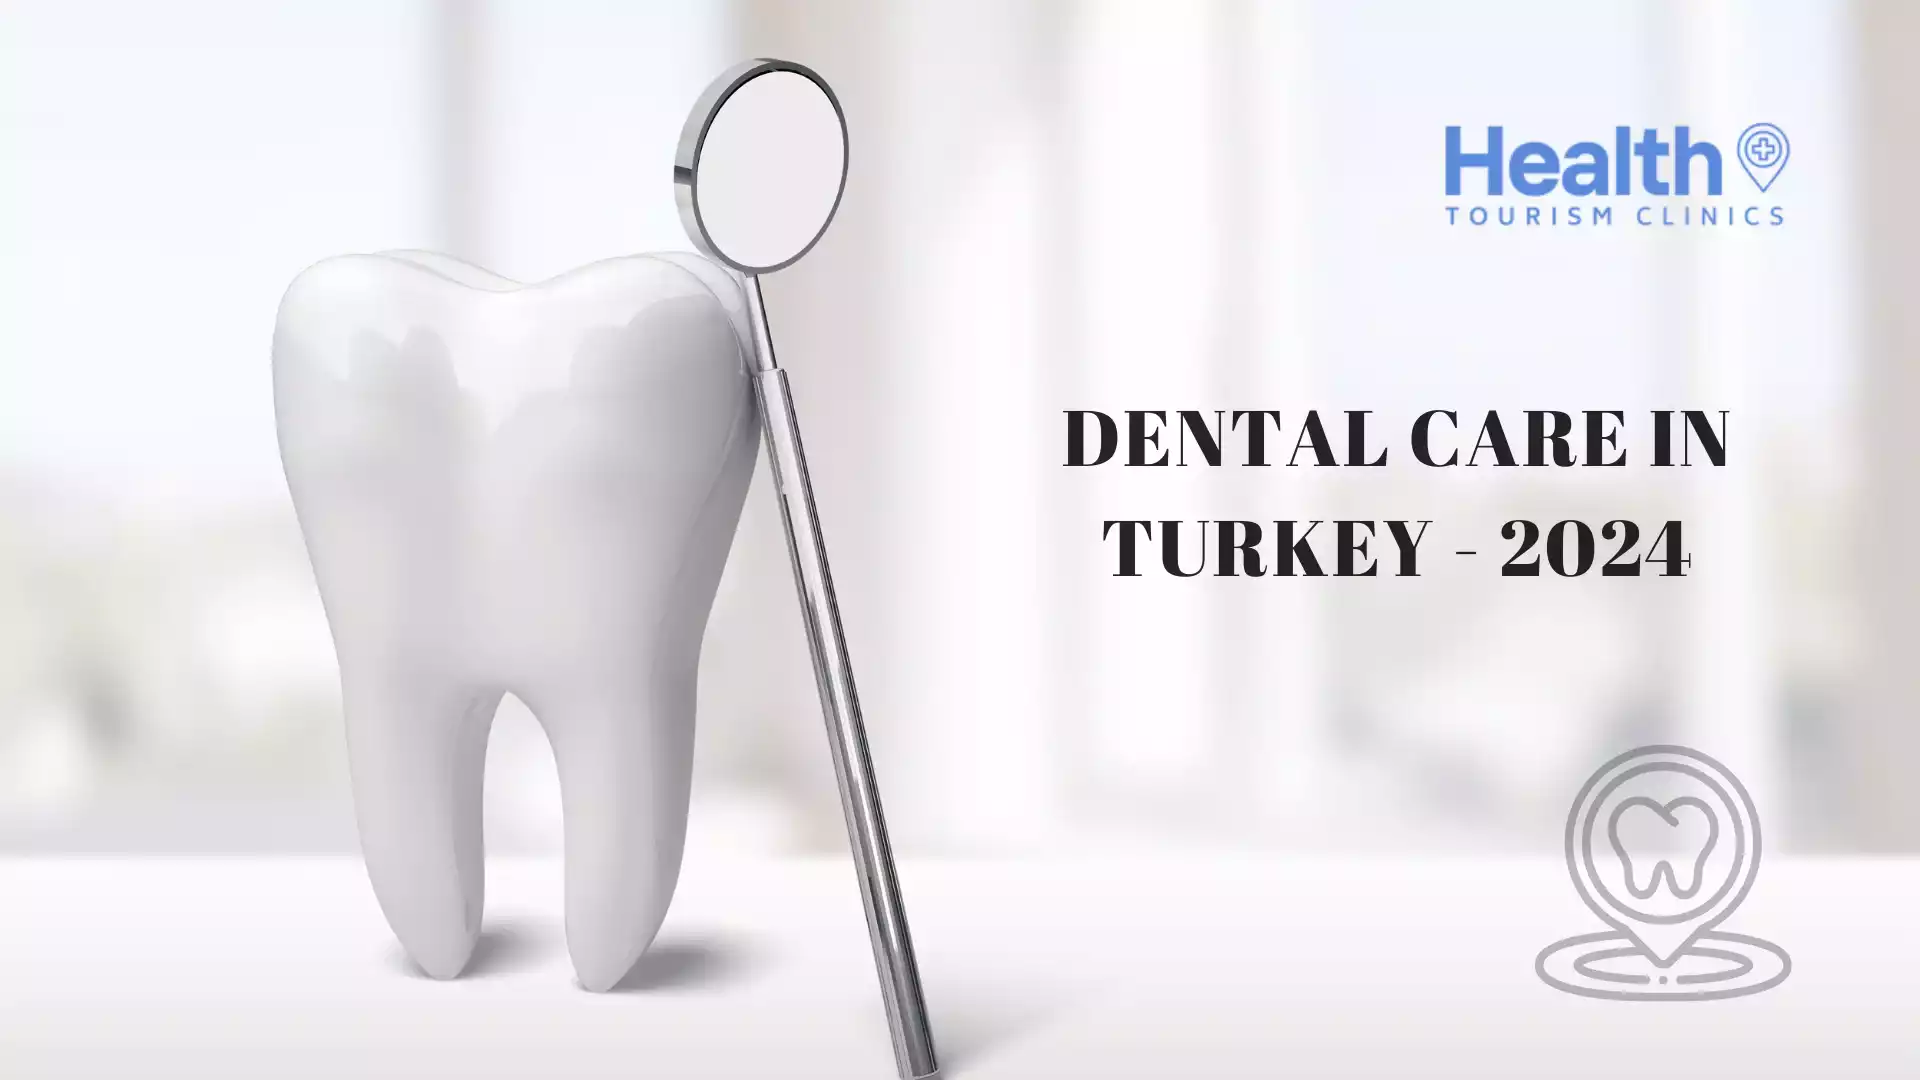 Dental Care in Turkey: Affordable and High-Quality – 2024